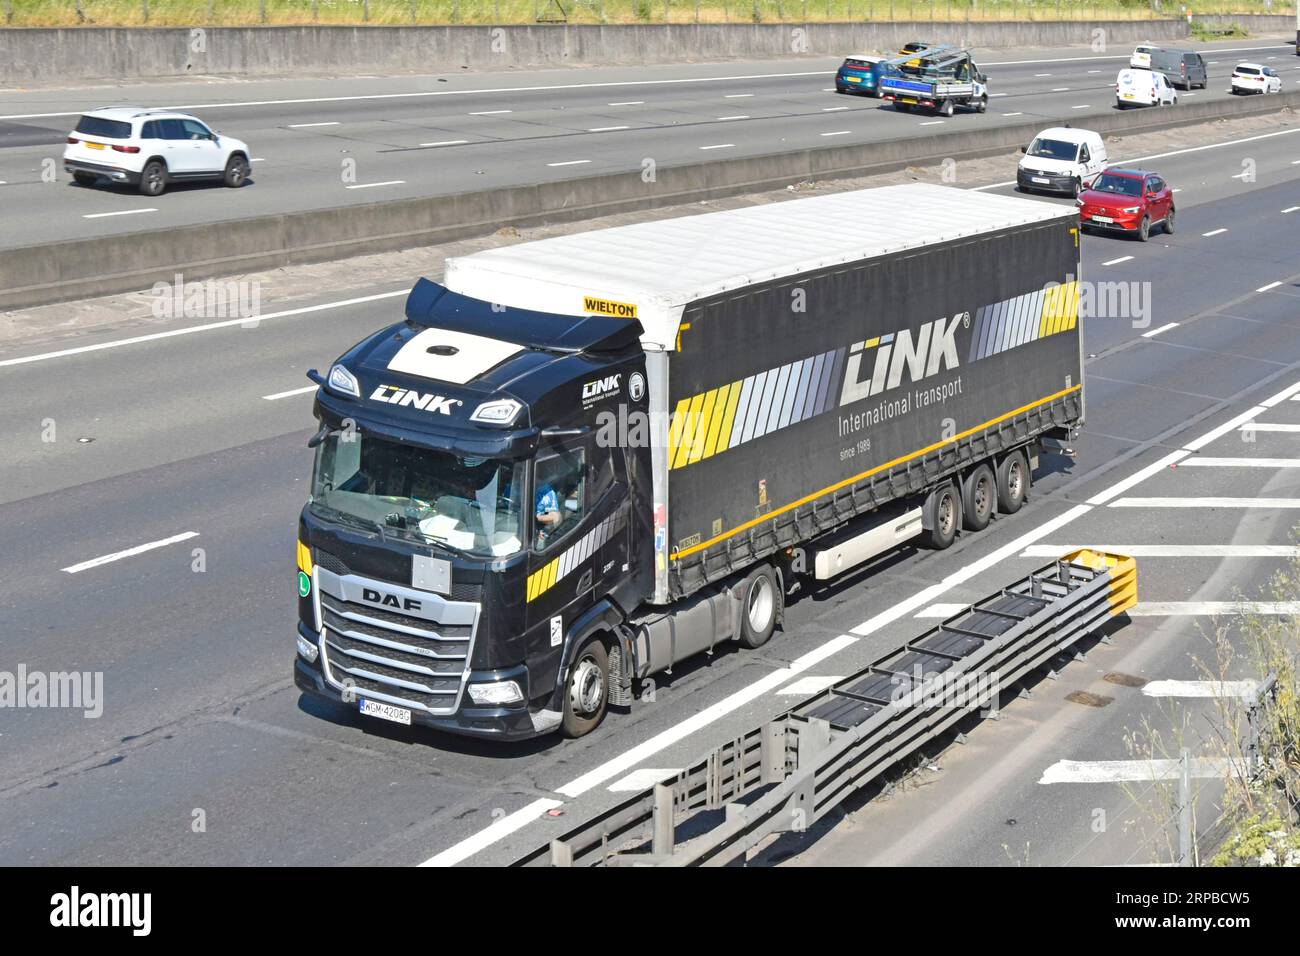 DAF black hgv lorry truck prime mover & Polish Wielton Group easy access semi trailer for Link international transport driving on M25 motorway road UK Stock Photo